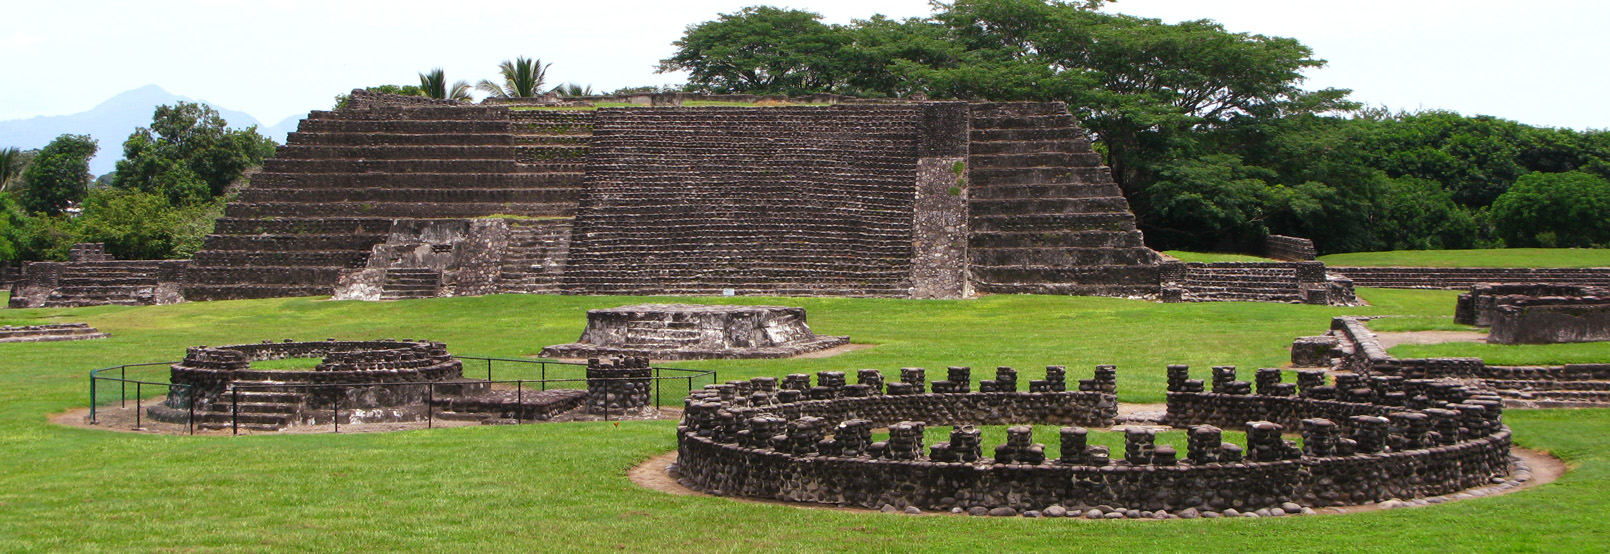 Cempoala - famous attractions in mexico